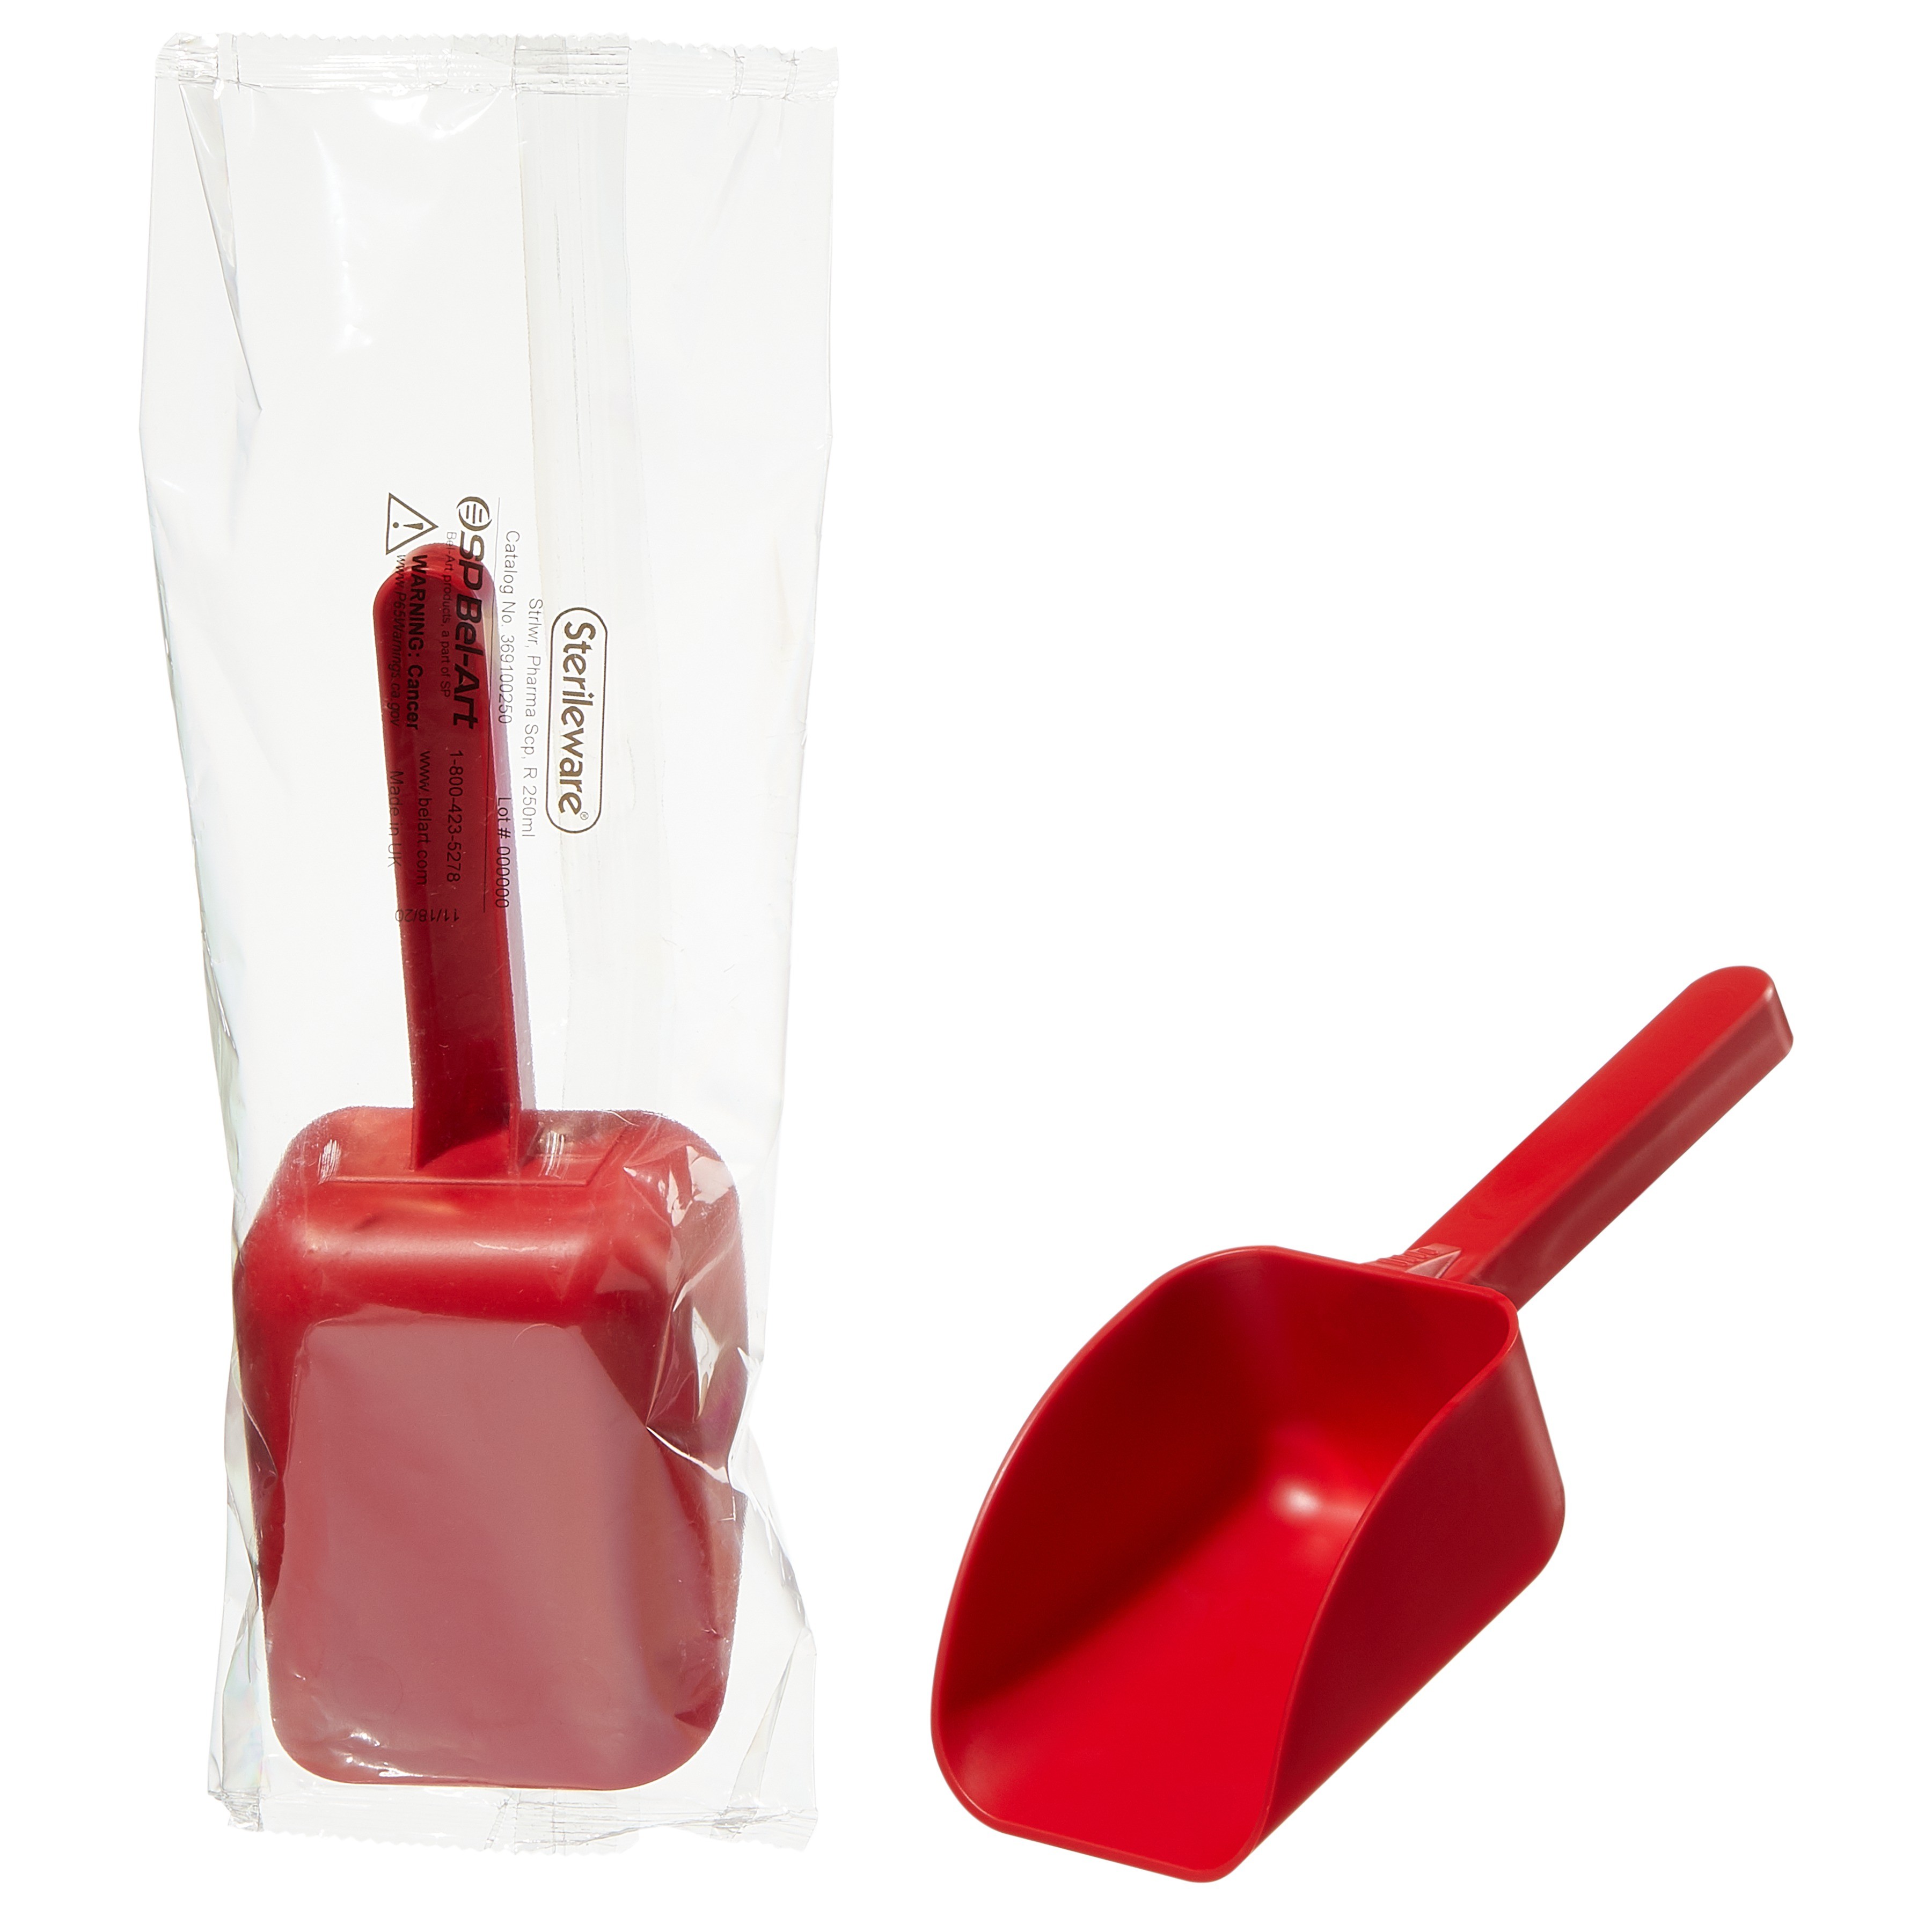 Sterileware Pharma Scoops - Red; 250ml (8oz), Individually Wrapped (Pack of 85)